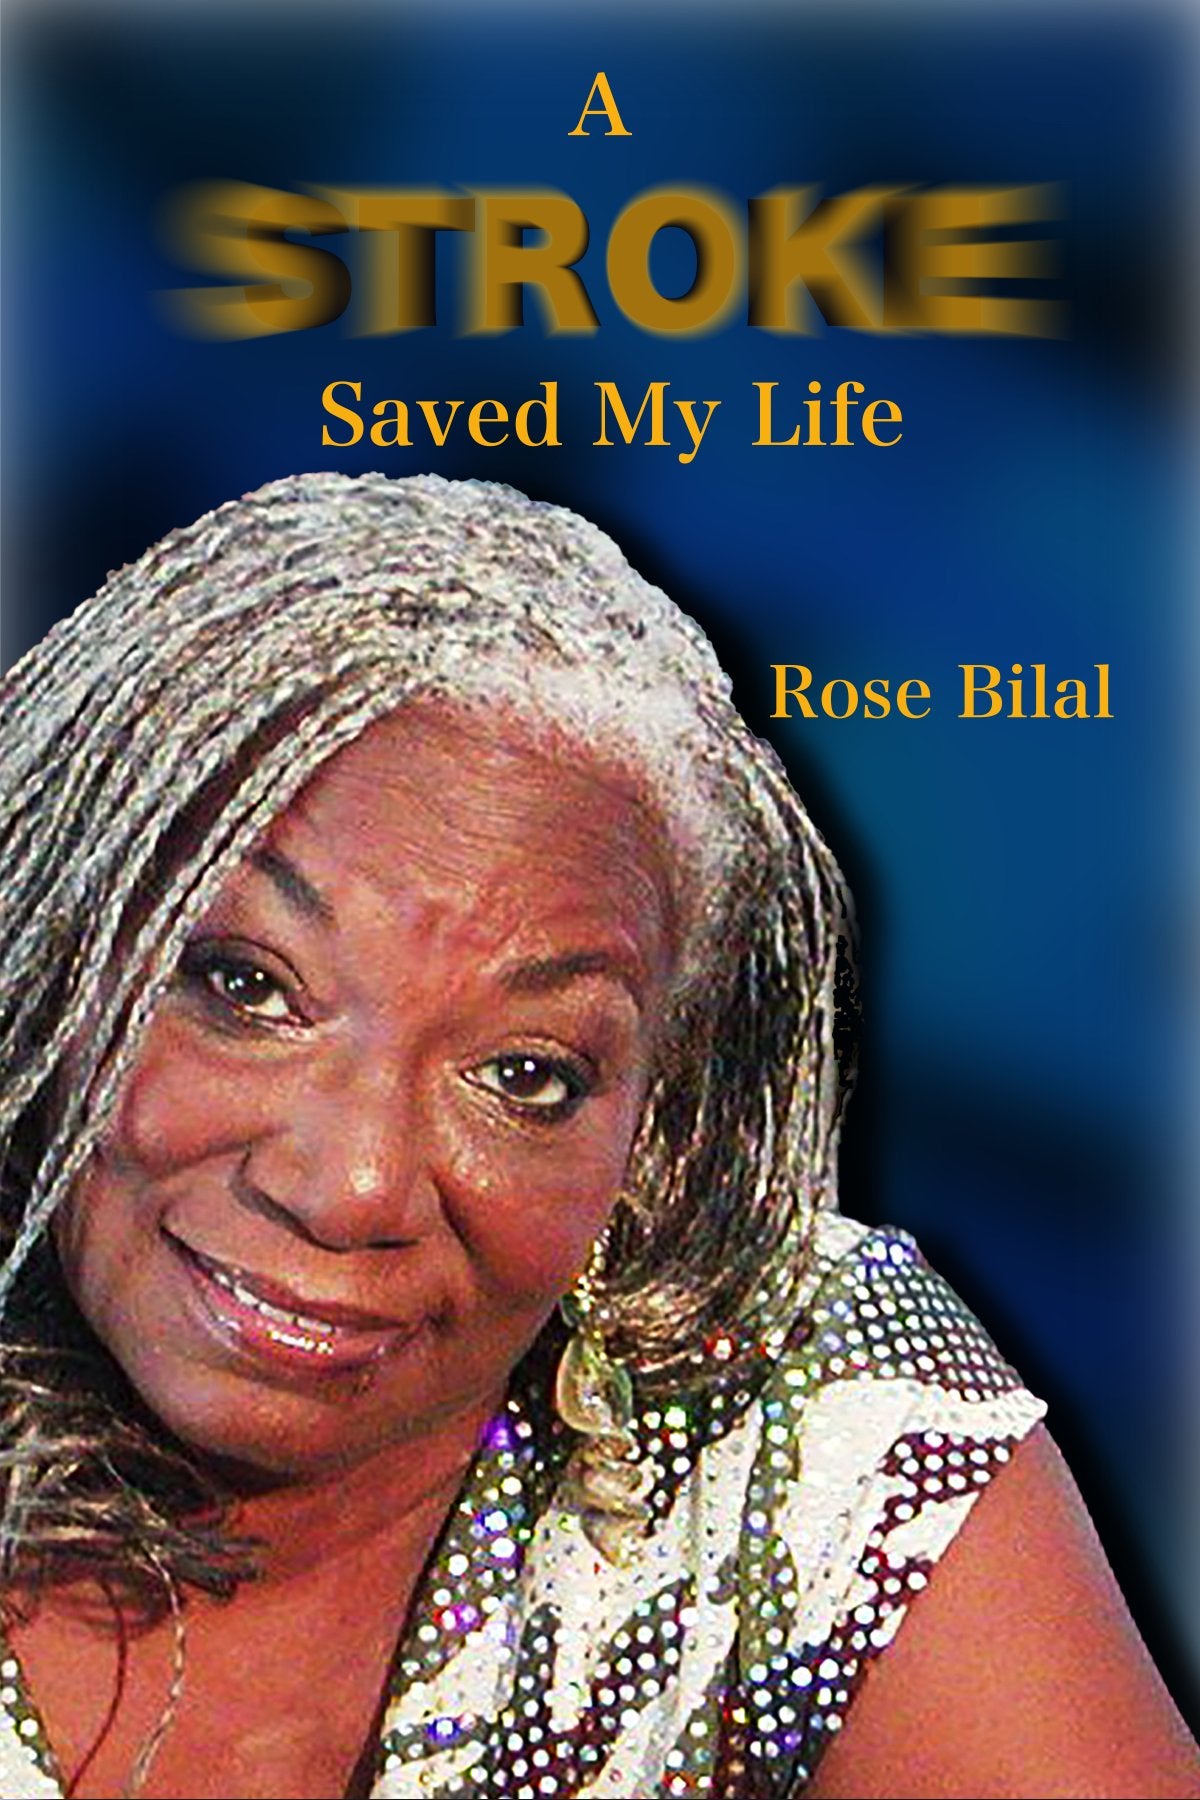 A Stroke Saved My Life by Rose Bilal